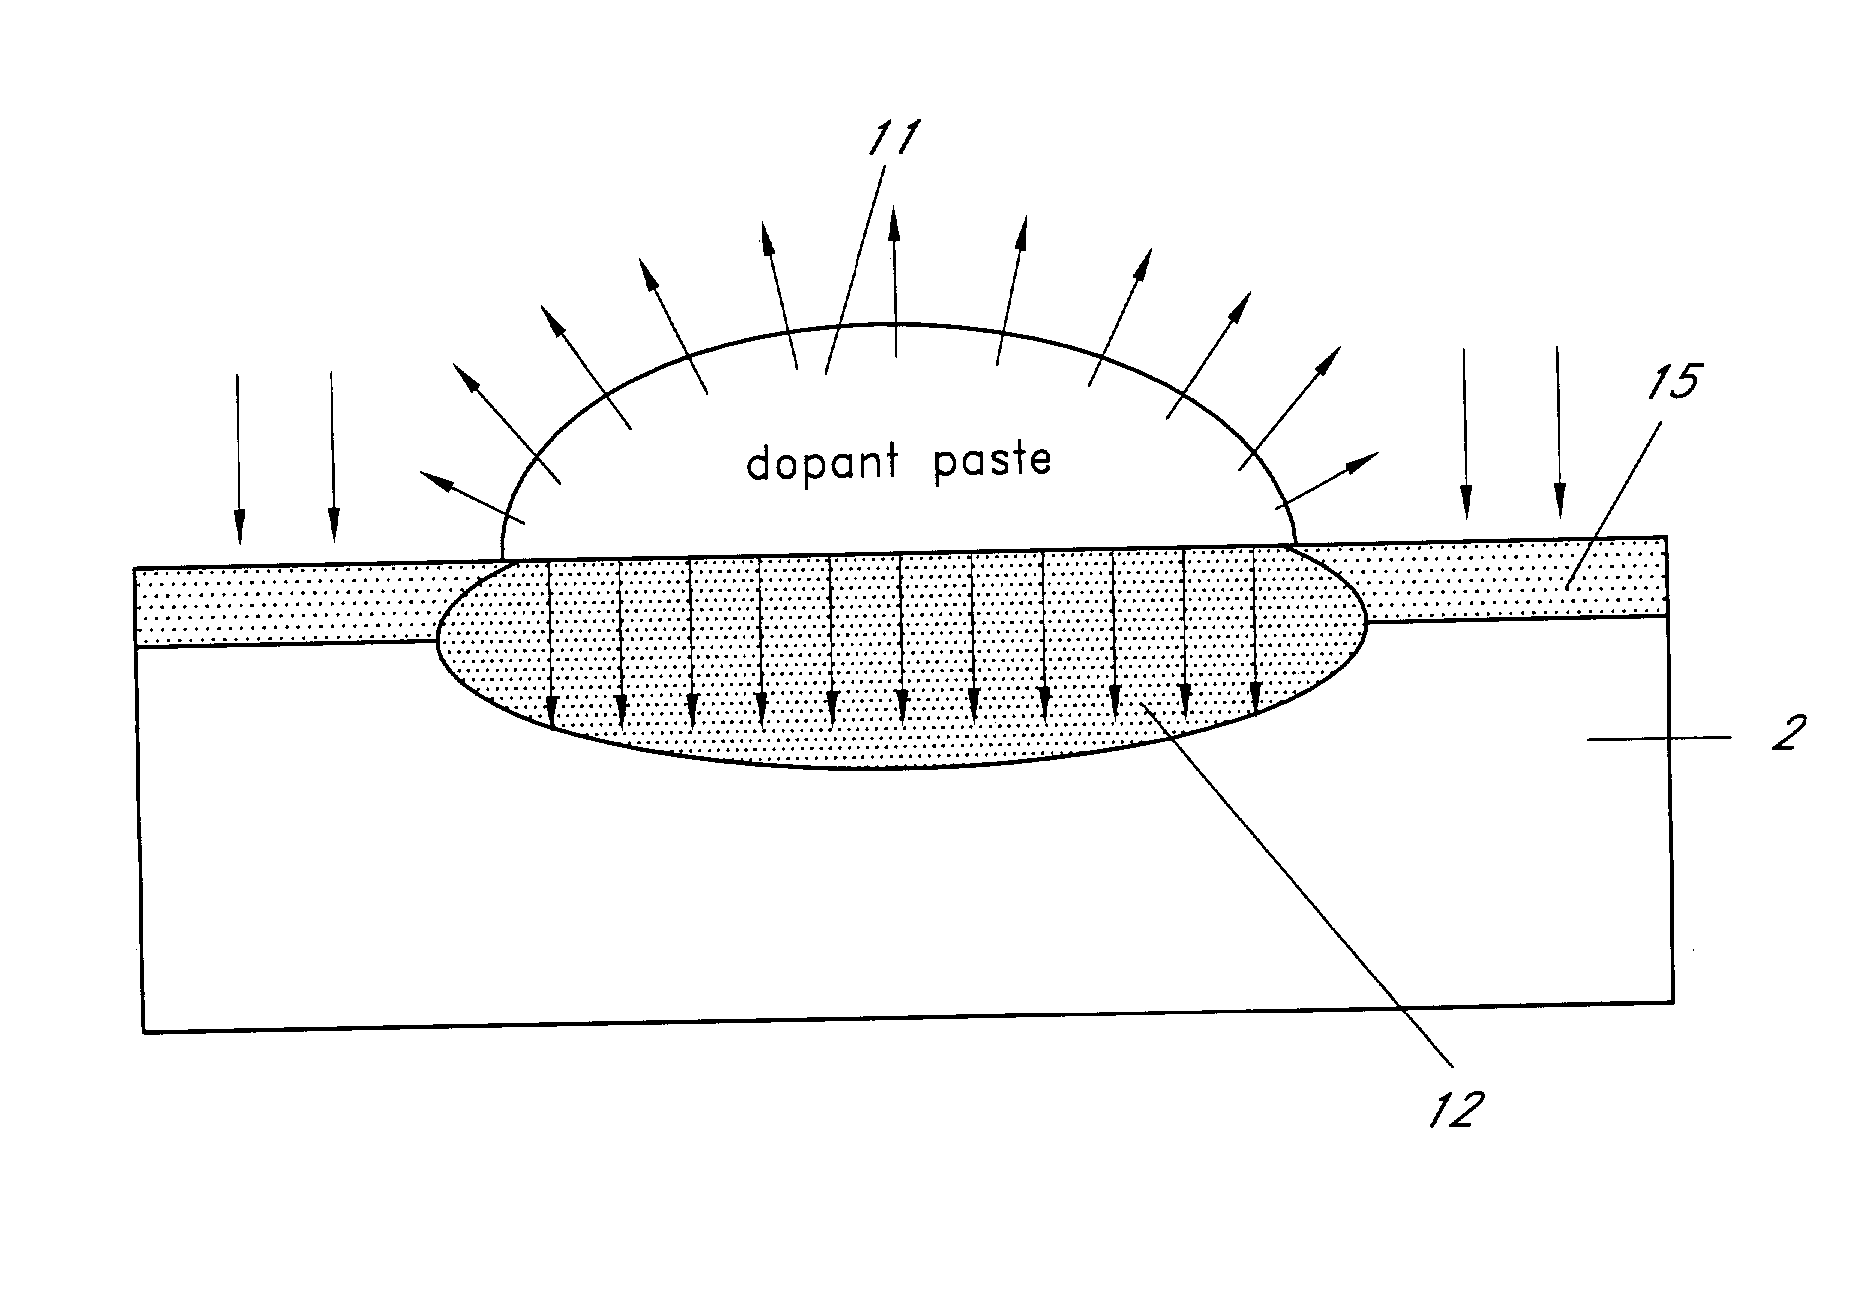 Semiconductor device with selectively diffused regions